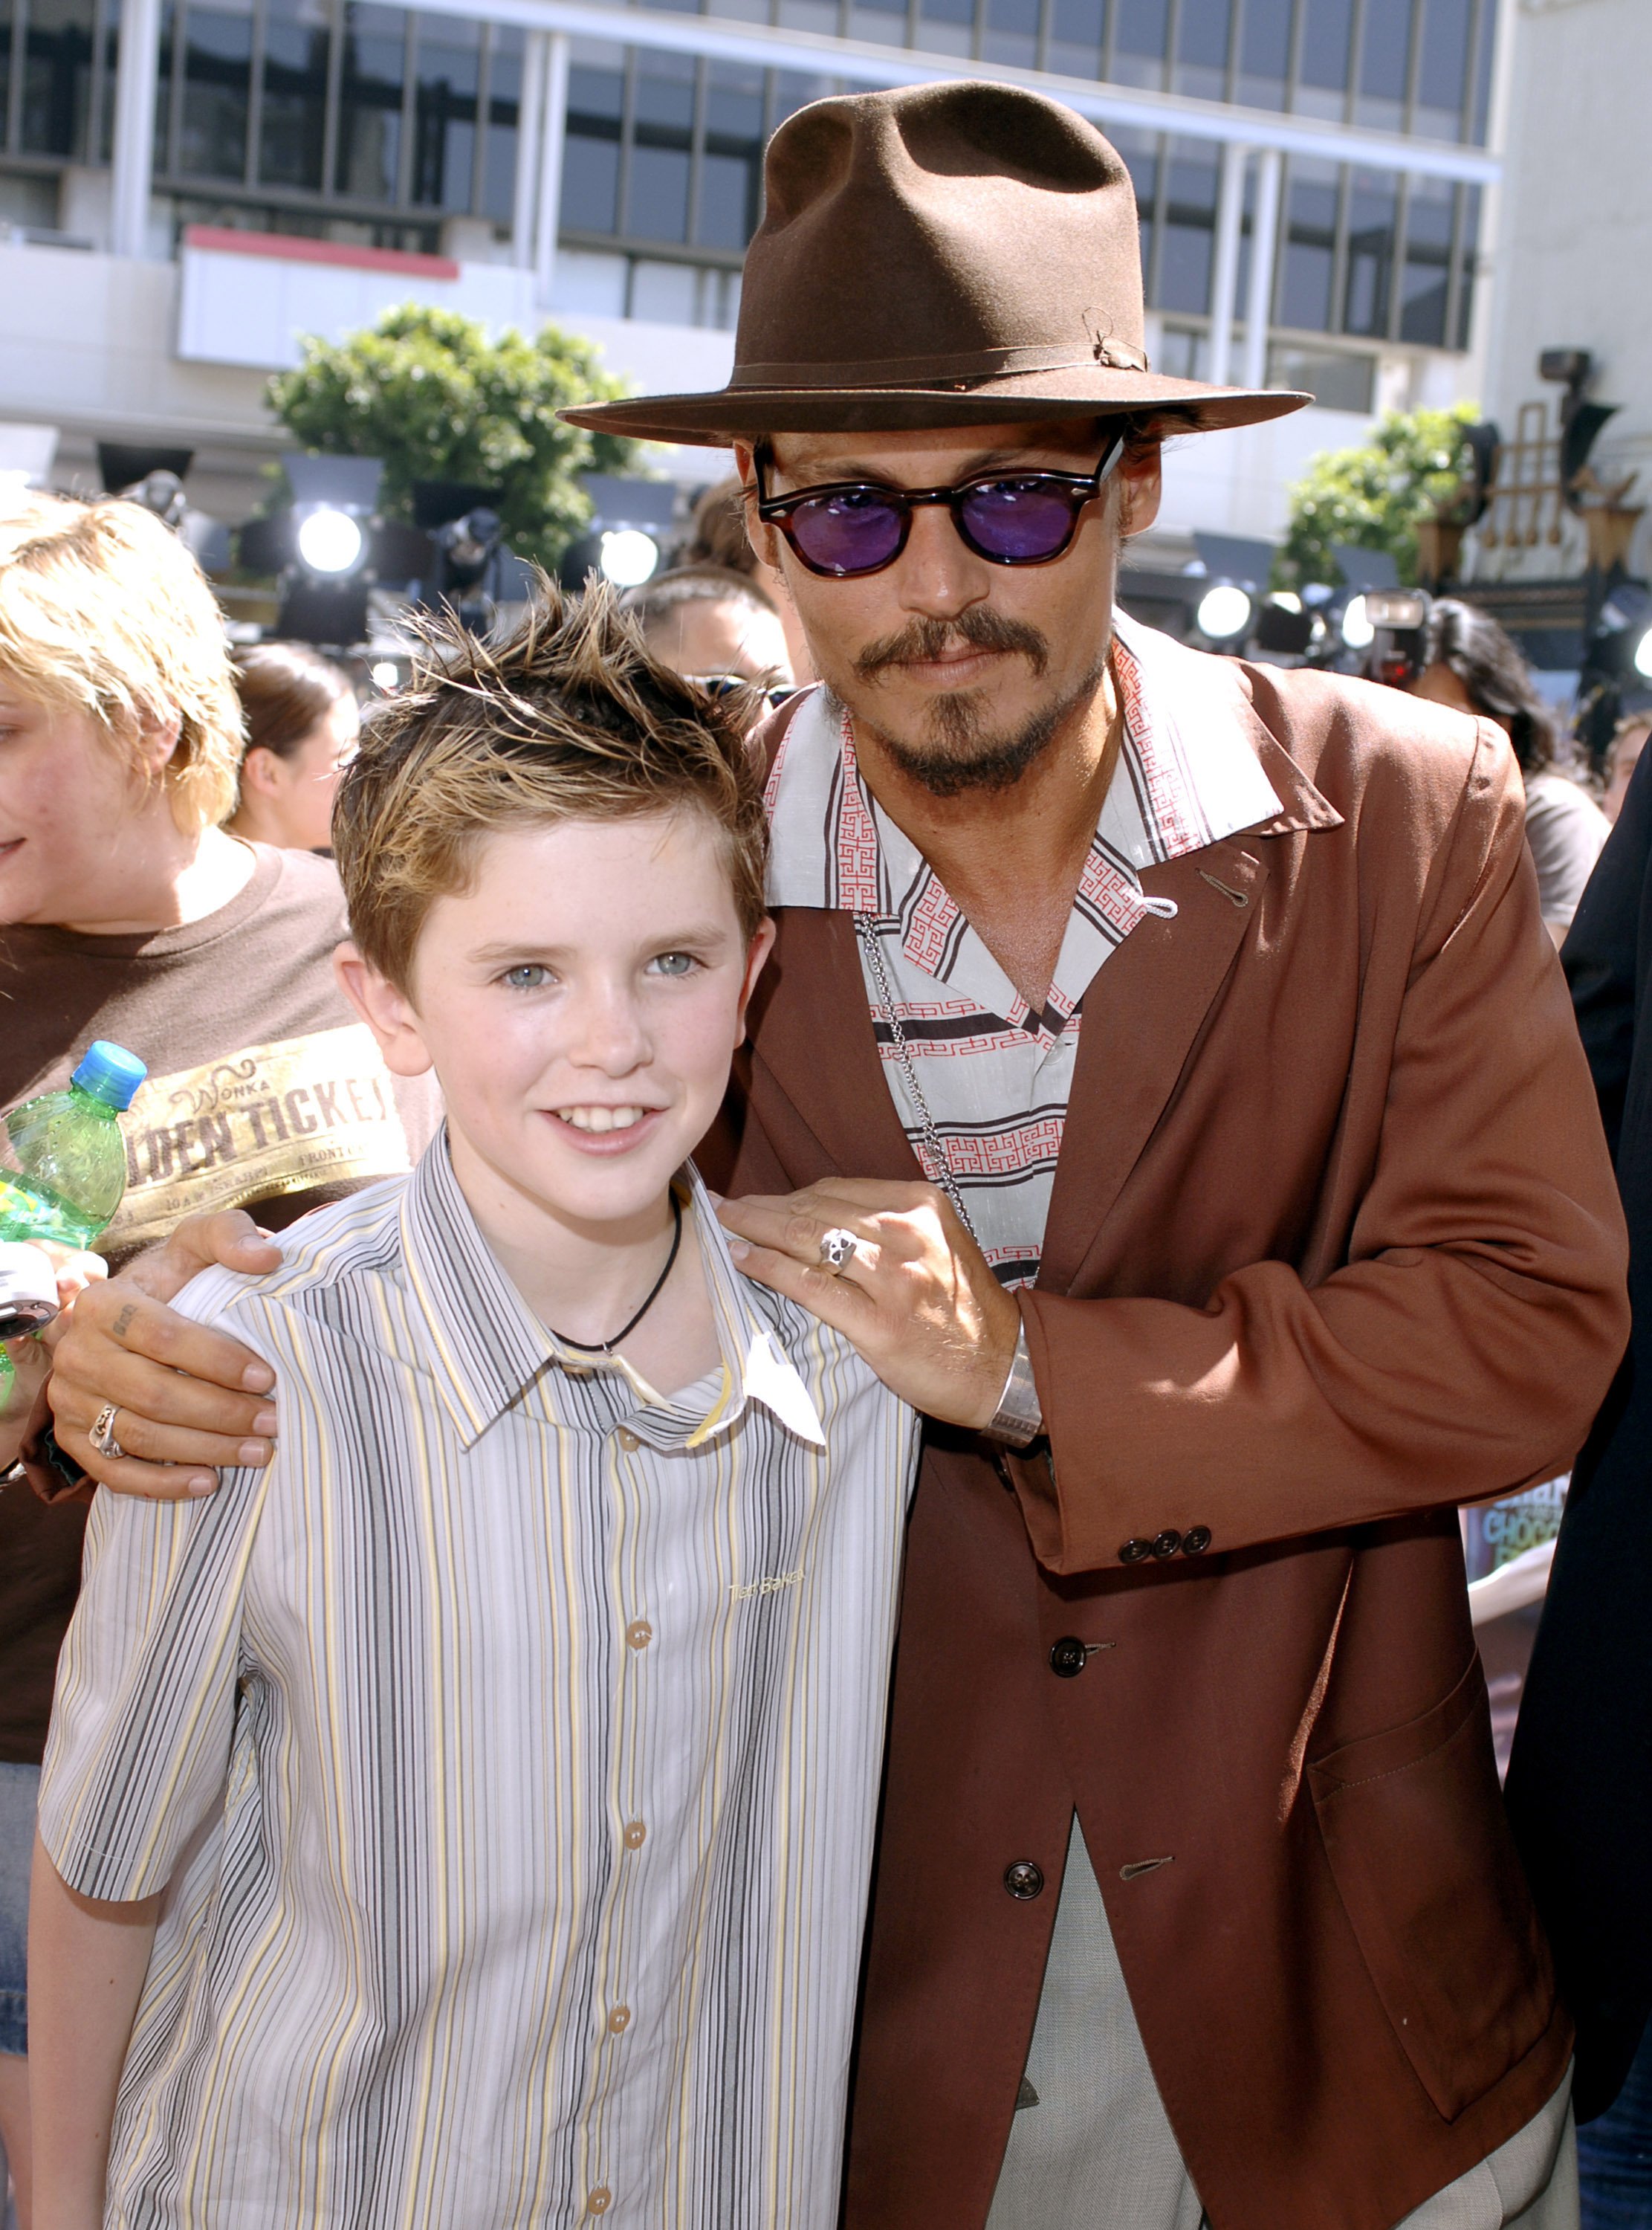 Image Credits: Getty Images / Freddie Highmore and Johnny Depp during "Charlie and the Chocolate Factory" Los Angeles Premiere